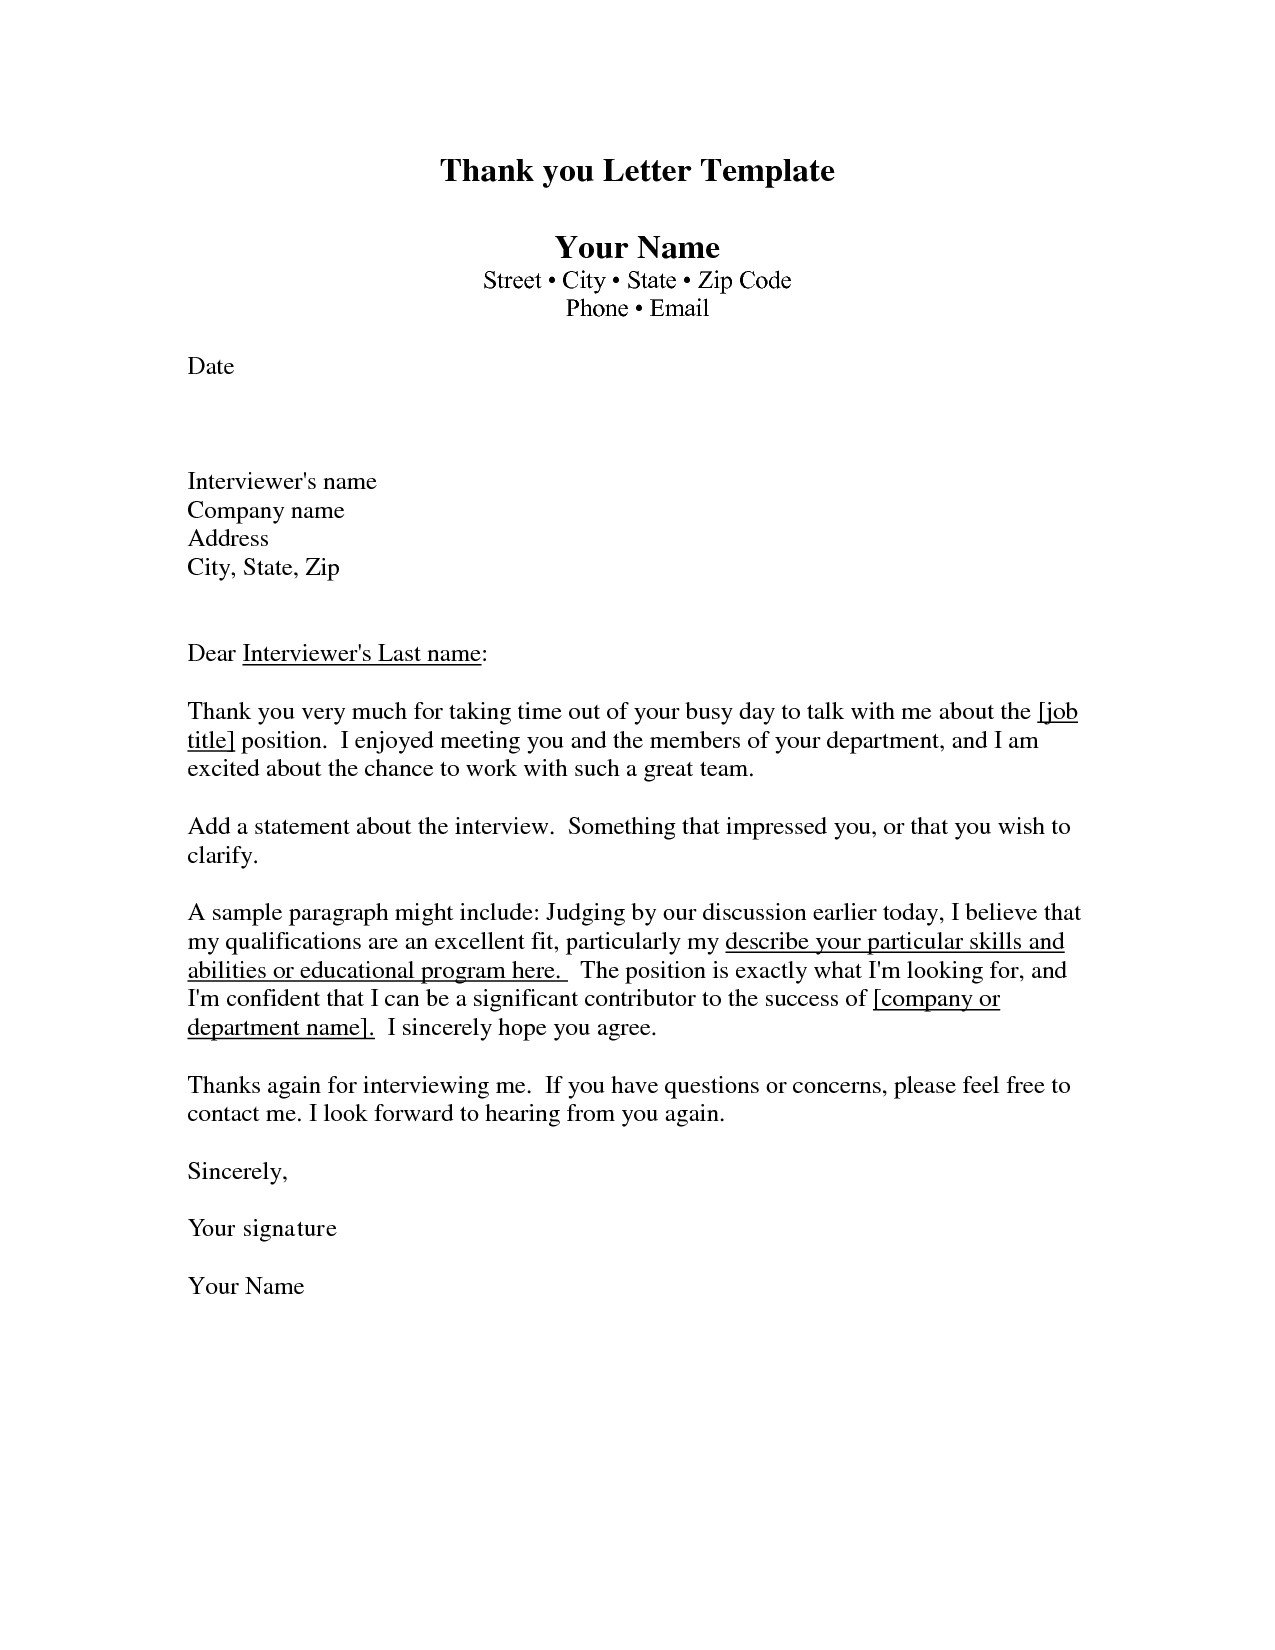 professional business thank you letter